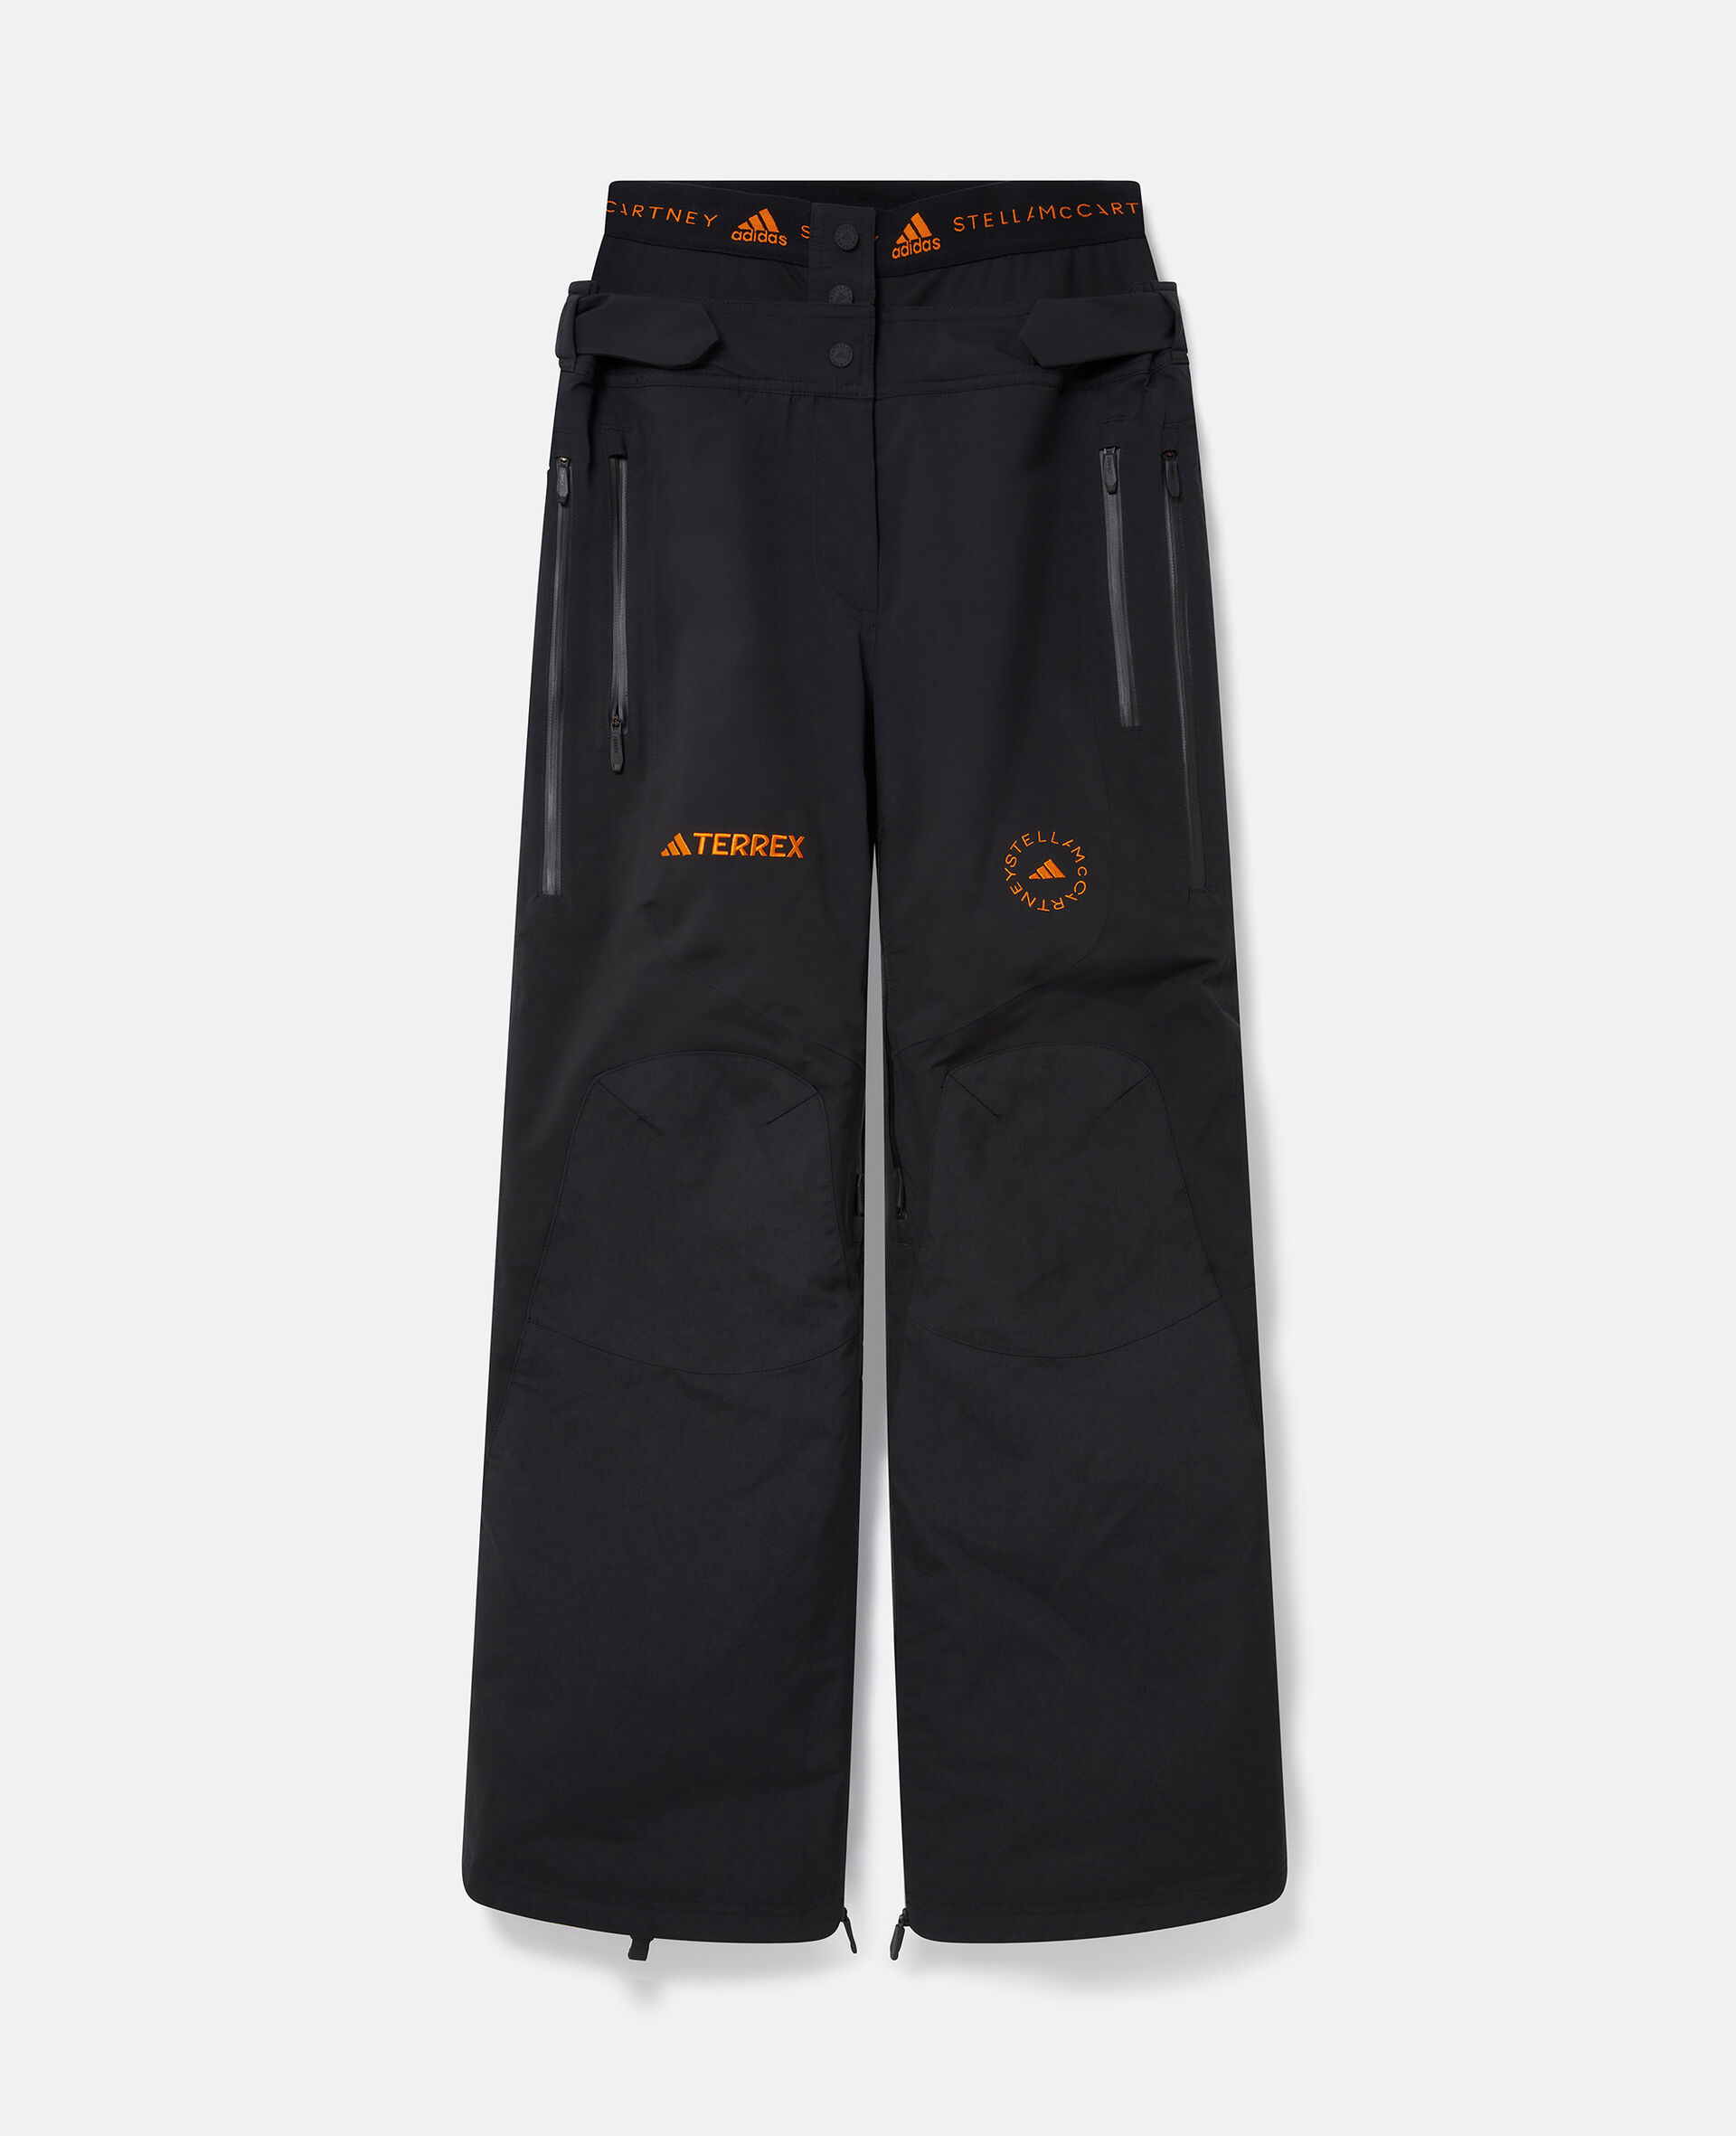 Terrex TrueNature Double Layer Insulated Ski Trousers-Black-large image number 0